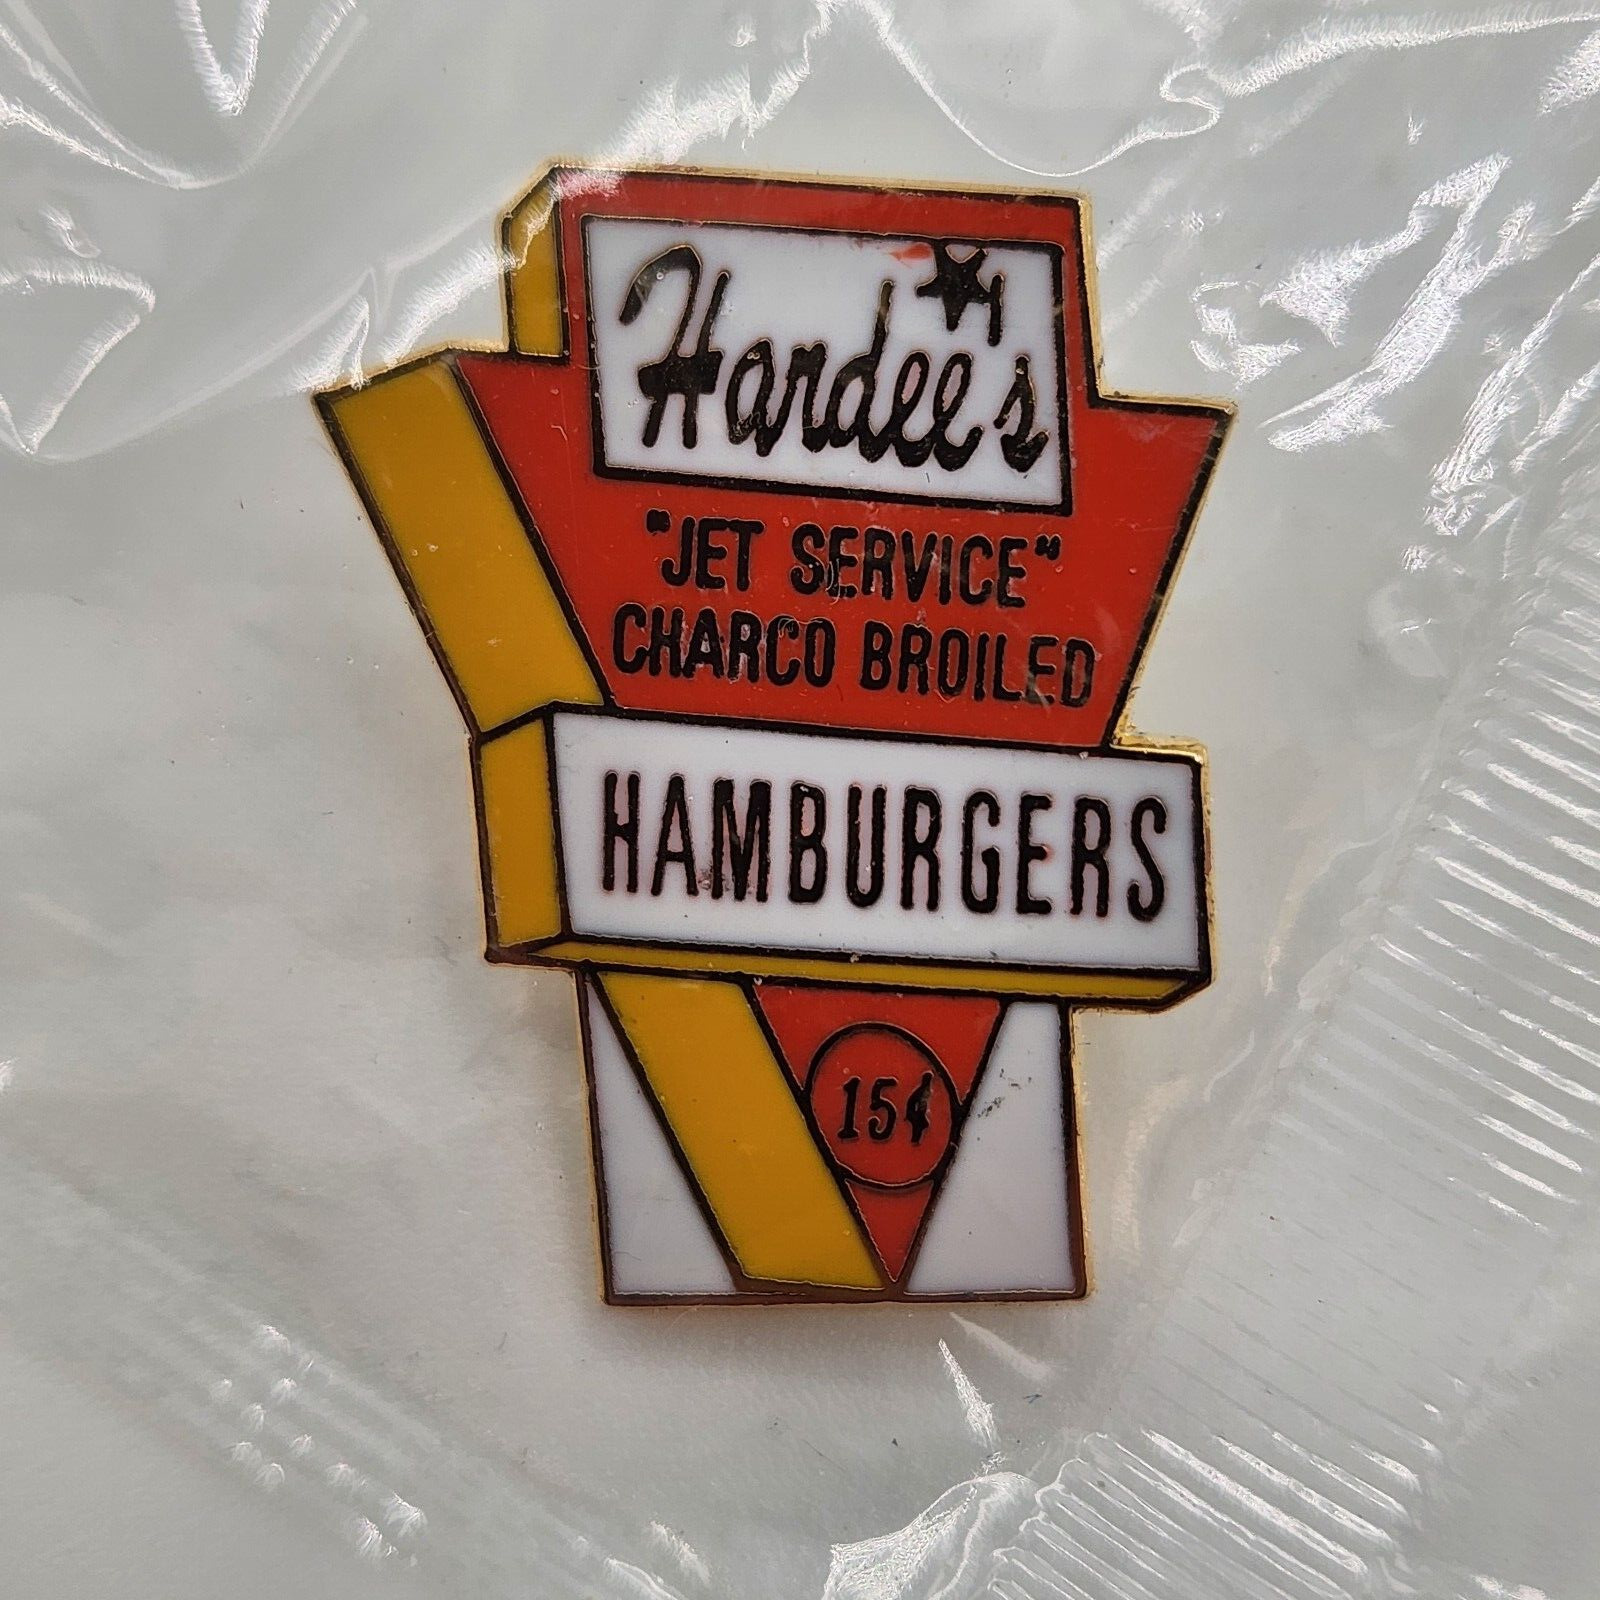 Vintage Hardees Restaurant Jet Service Charco Broiled Hambuger 15c Pin Lapel Pin